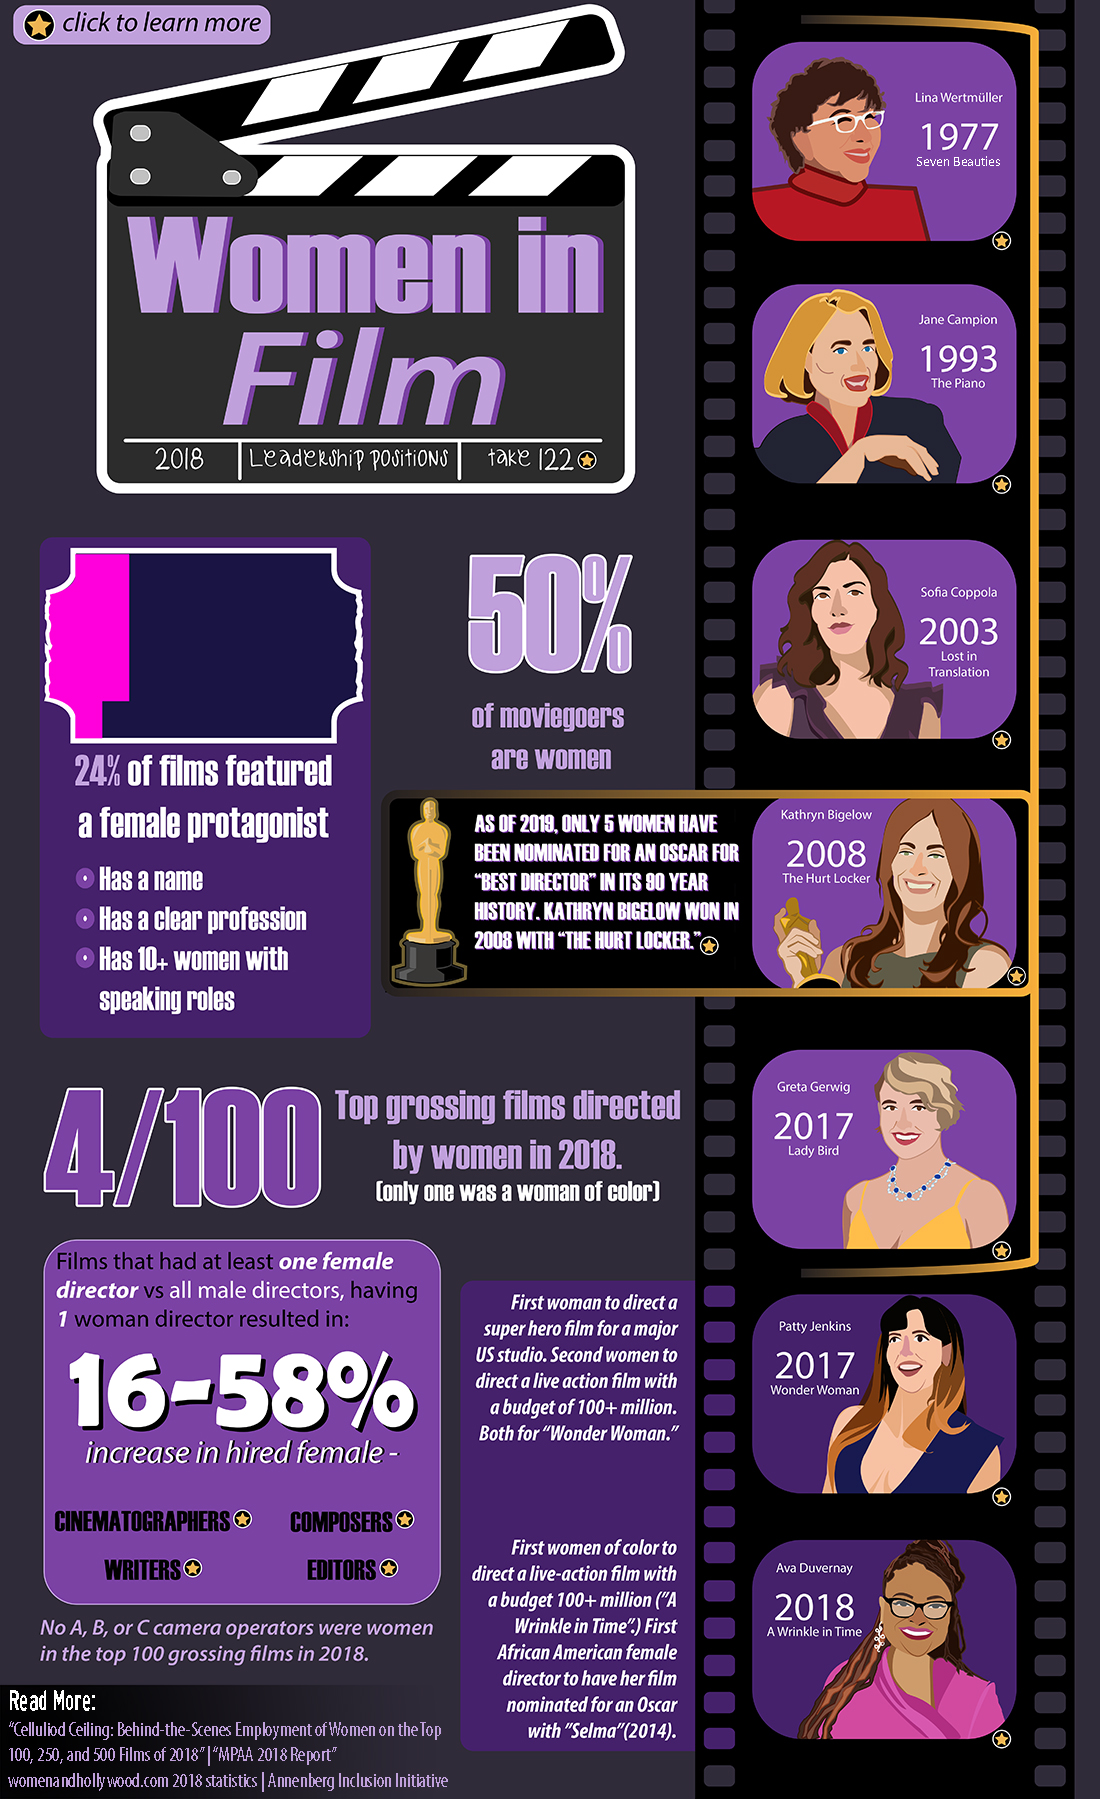 INTERACTIVE INFOGRAPHIC: Data and statistics on women directors in film. The numbers show having one women at the head of a film increases the chances of women being at the helms of other leadership positions in a film. Interactive Infographic by The Signal Online Editor Alyssa Shotwell.